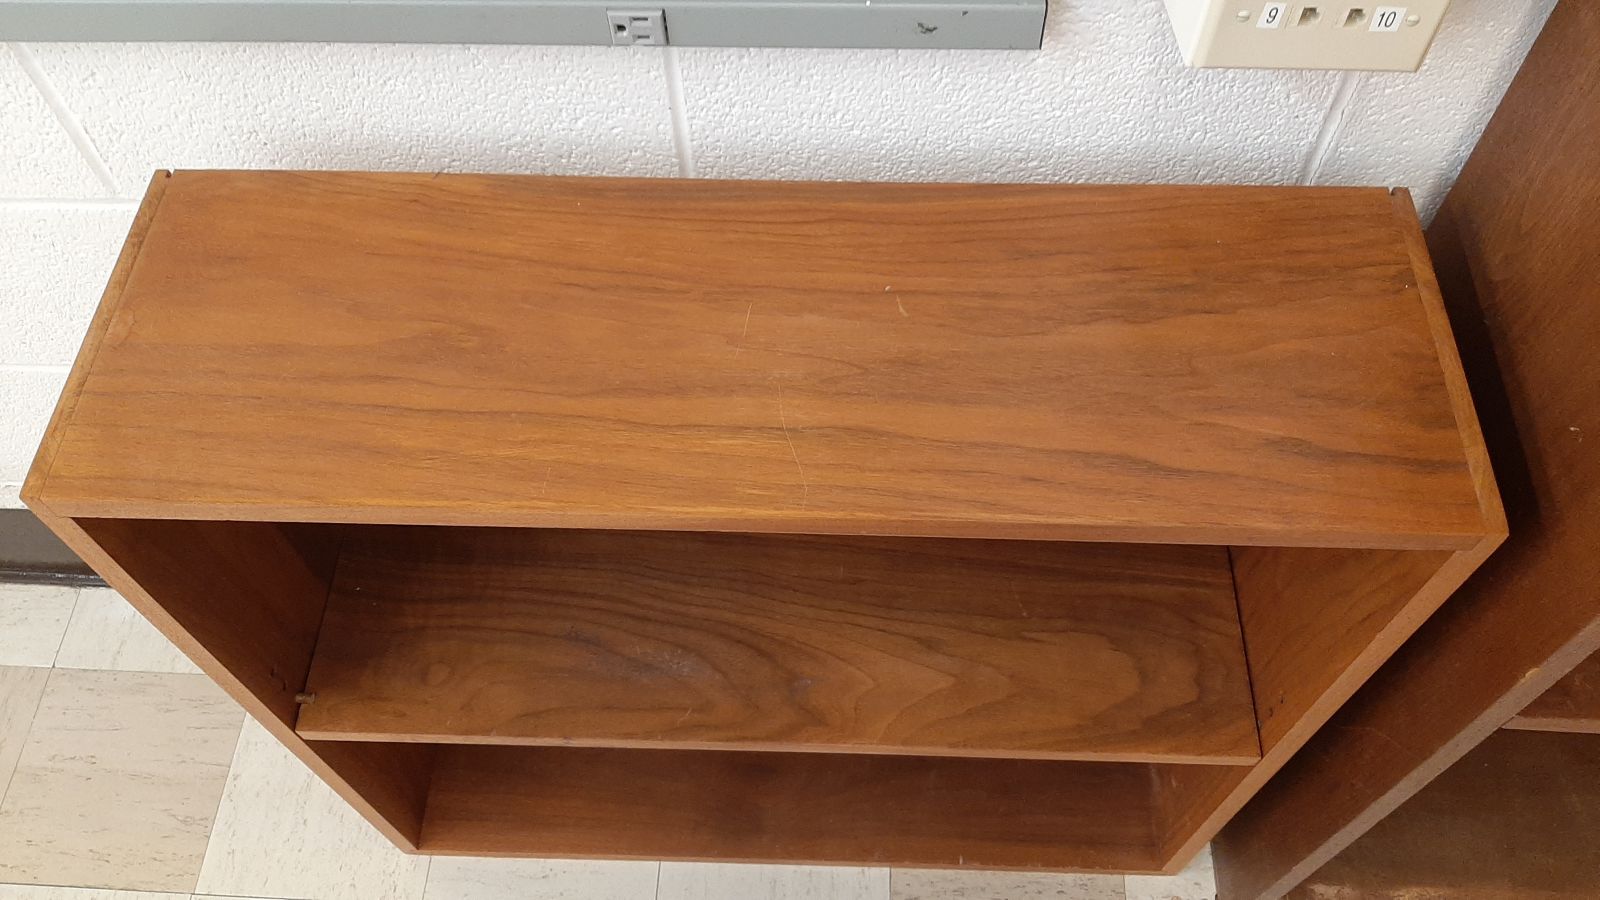 An image of the top of a 2-shelf wood bookcase.